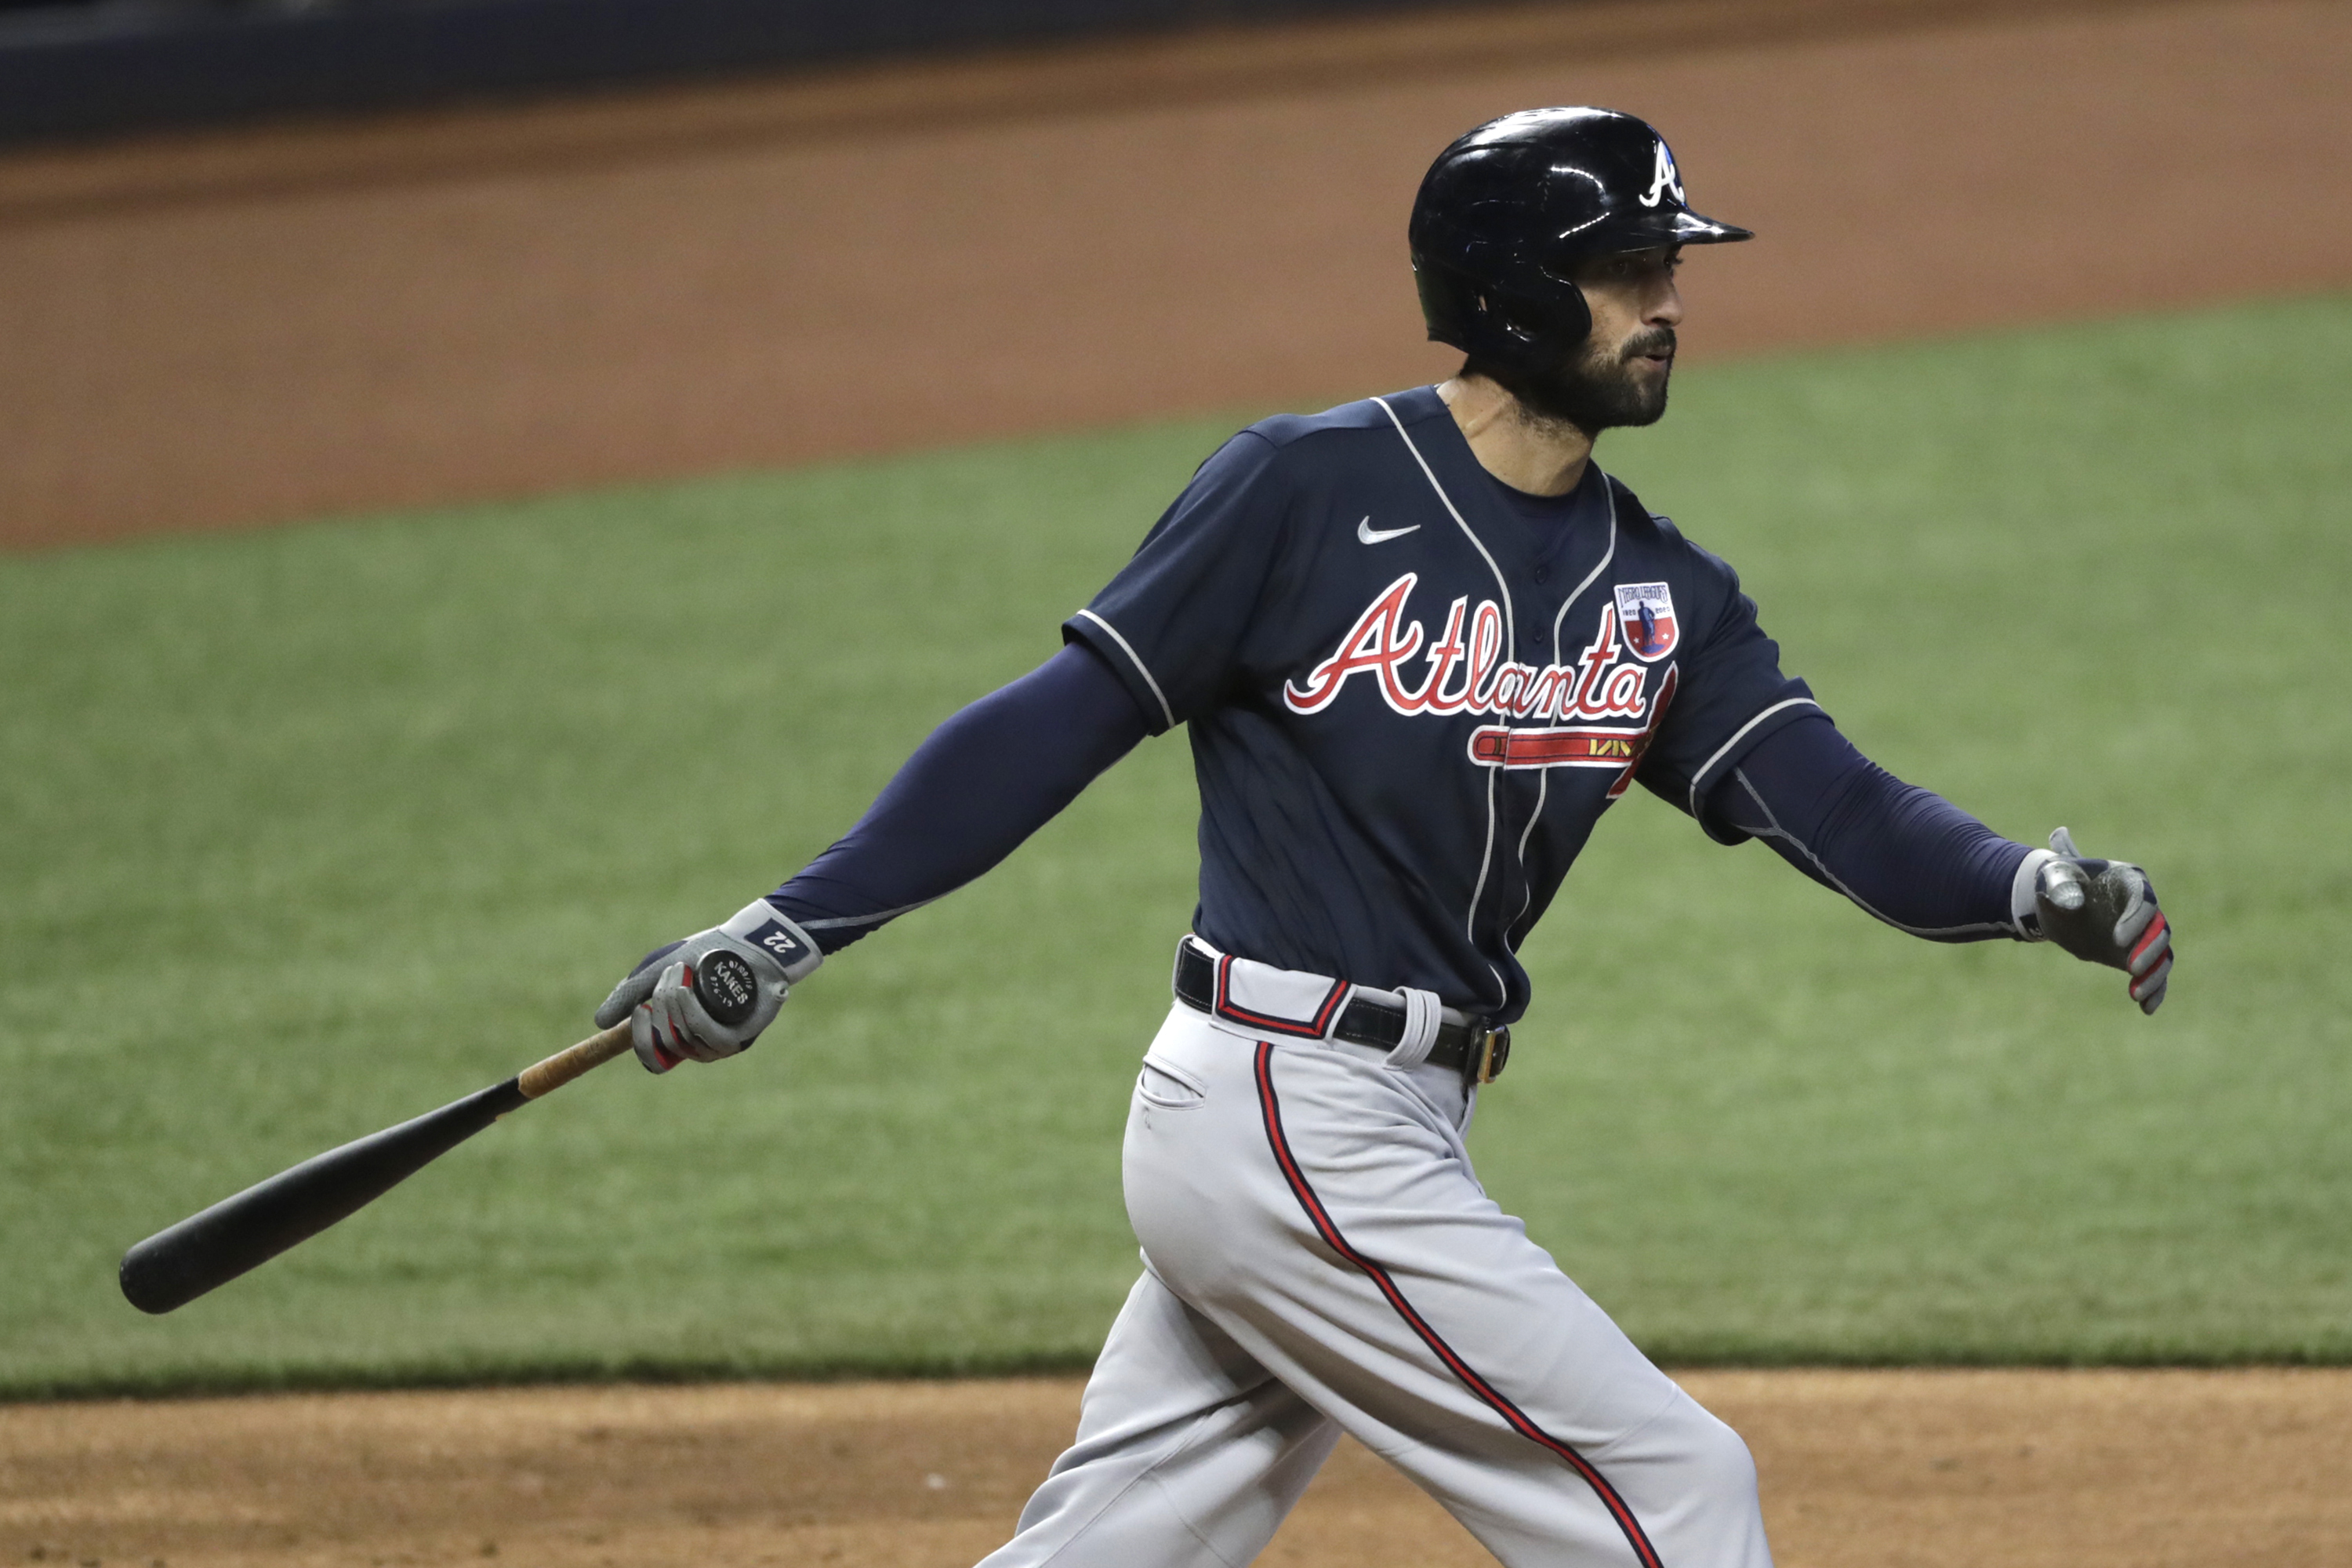 Nick Markakis retires after 15 years with Braves, Orioles - NBC Sports